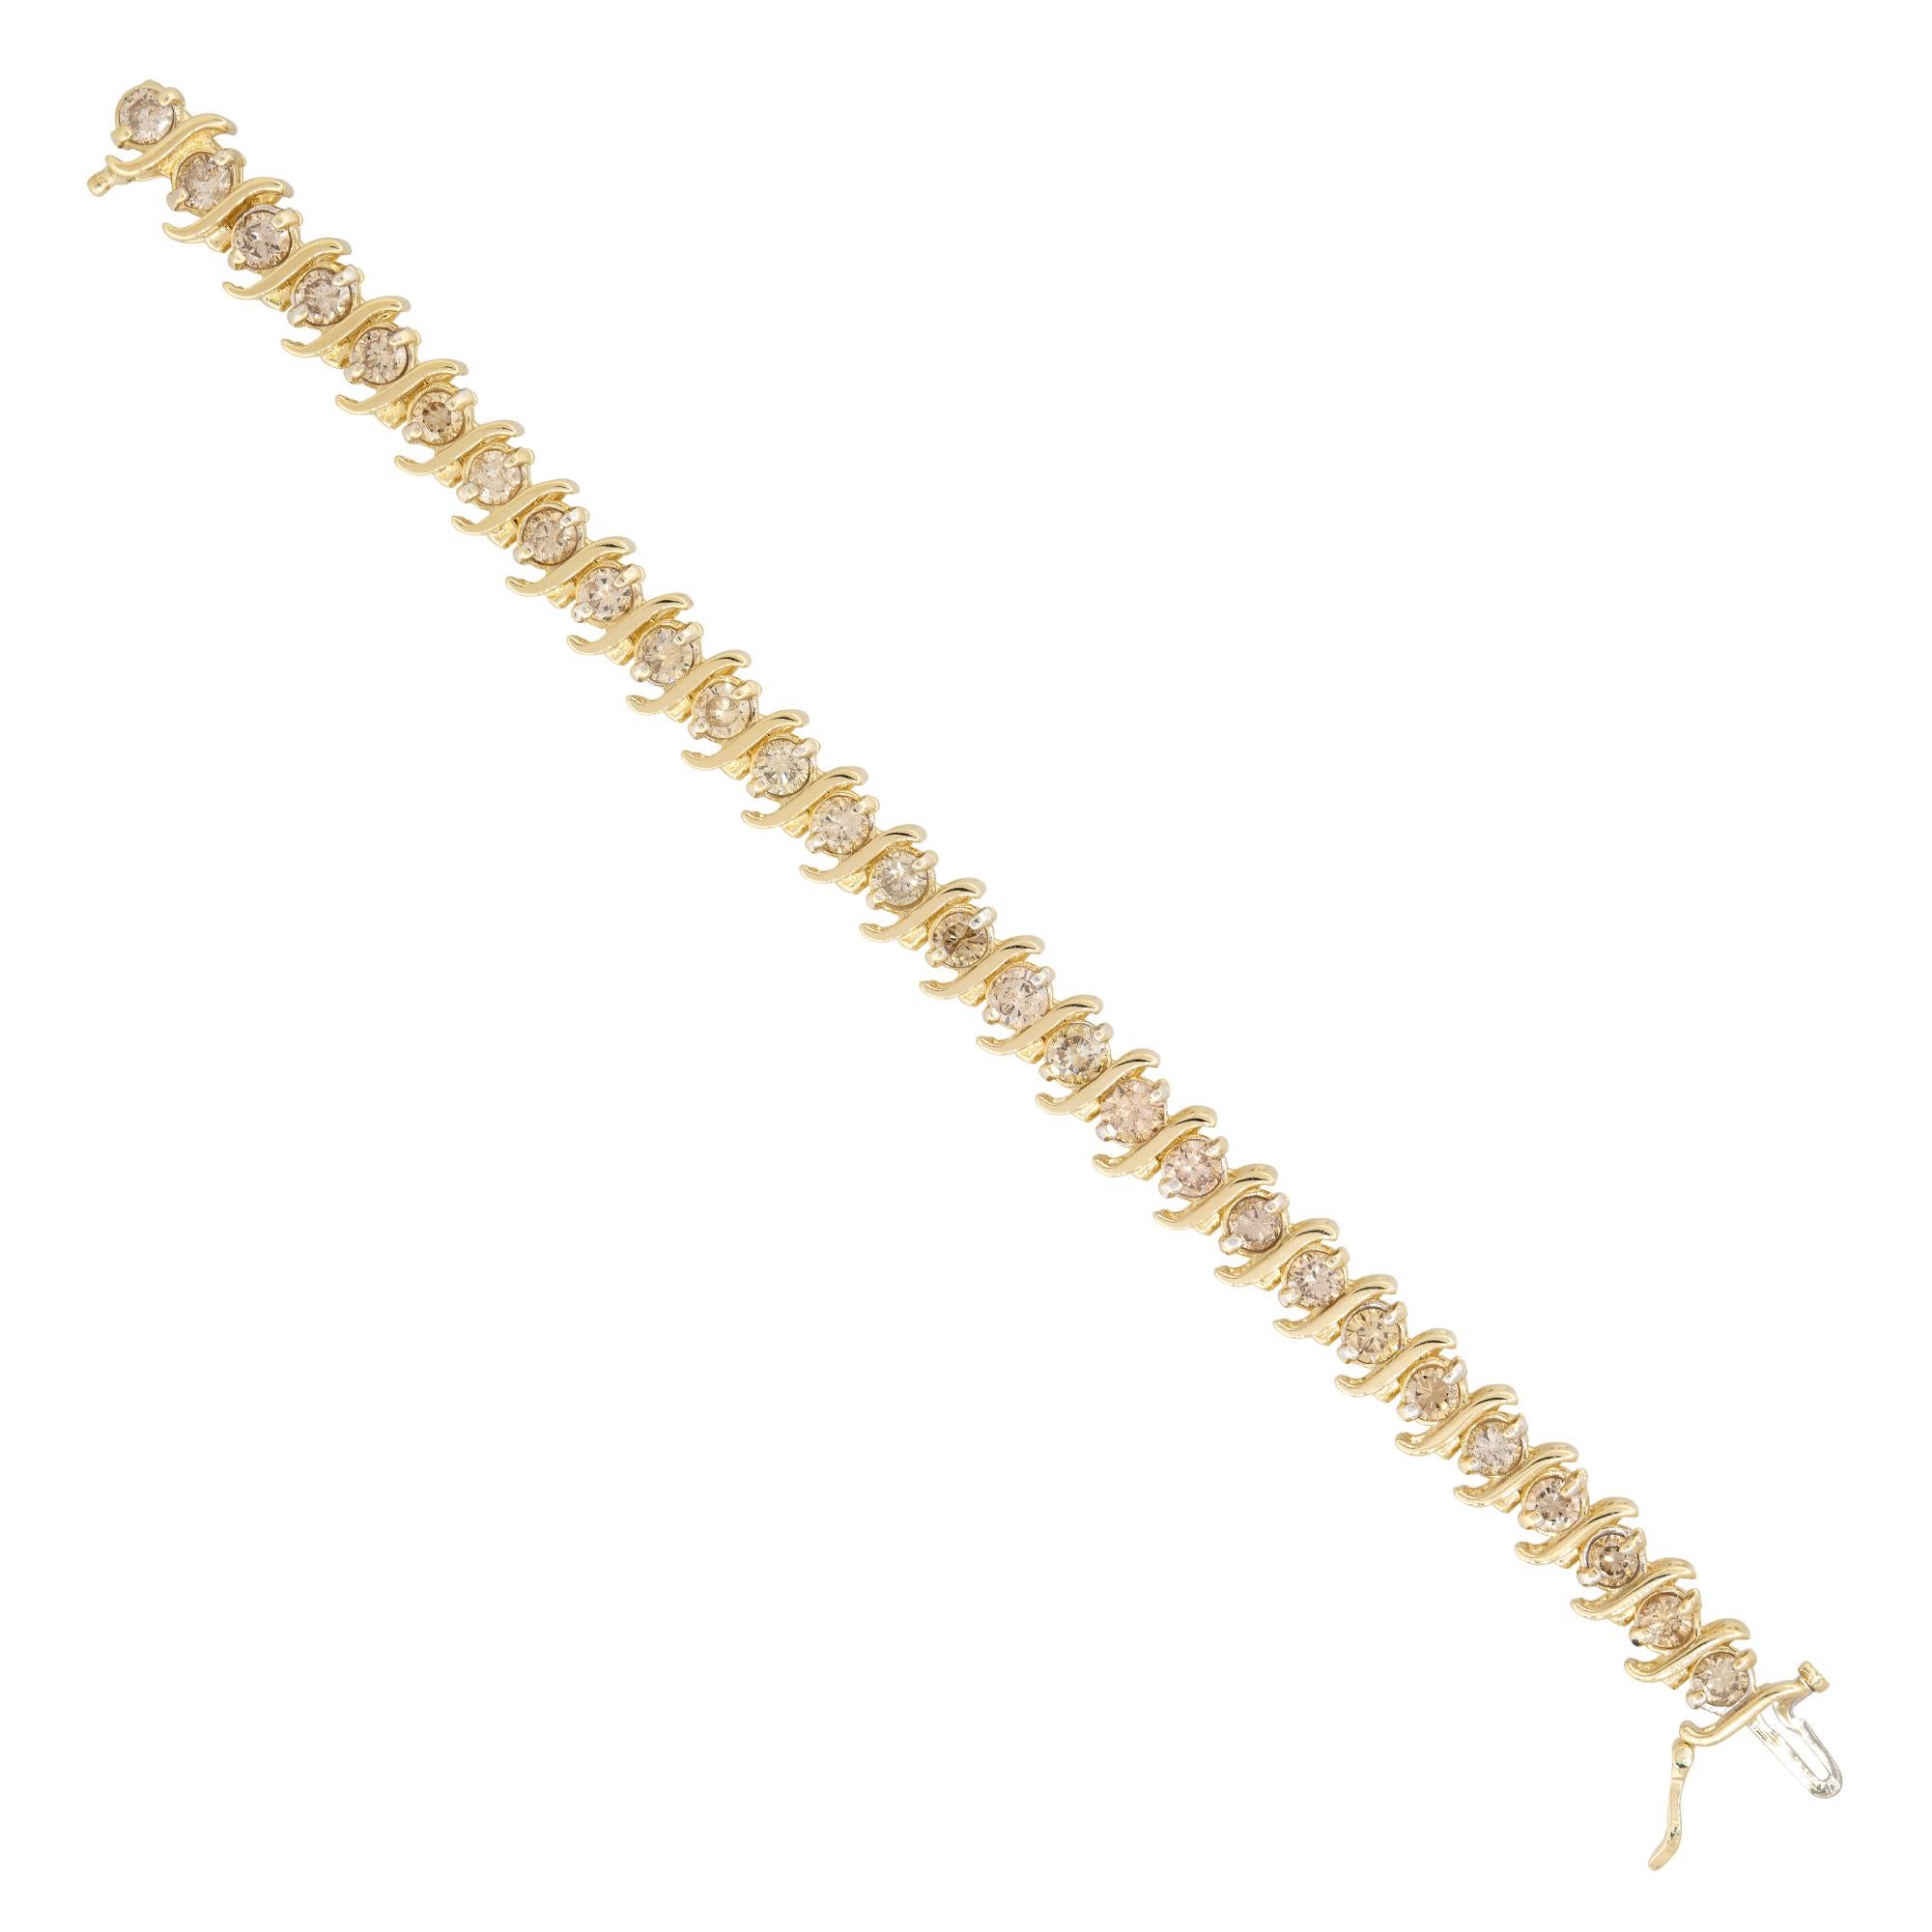 14k Yellow Gold 8.0ct Round Brilliant Cut Diamond S-Link Tennis Bracelet

Material: 14k Yellow Gold
Diamond Details: There are approximately 8.0 carats of round brilliant cut diamonds (28 stones)
Diamond Clarity: All diamonds are approximately SI-I1